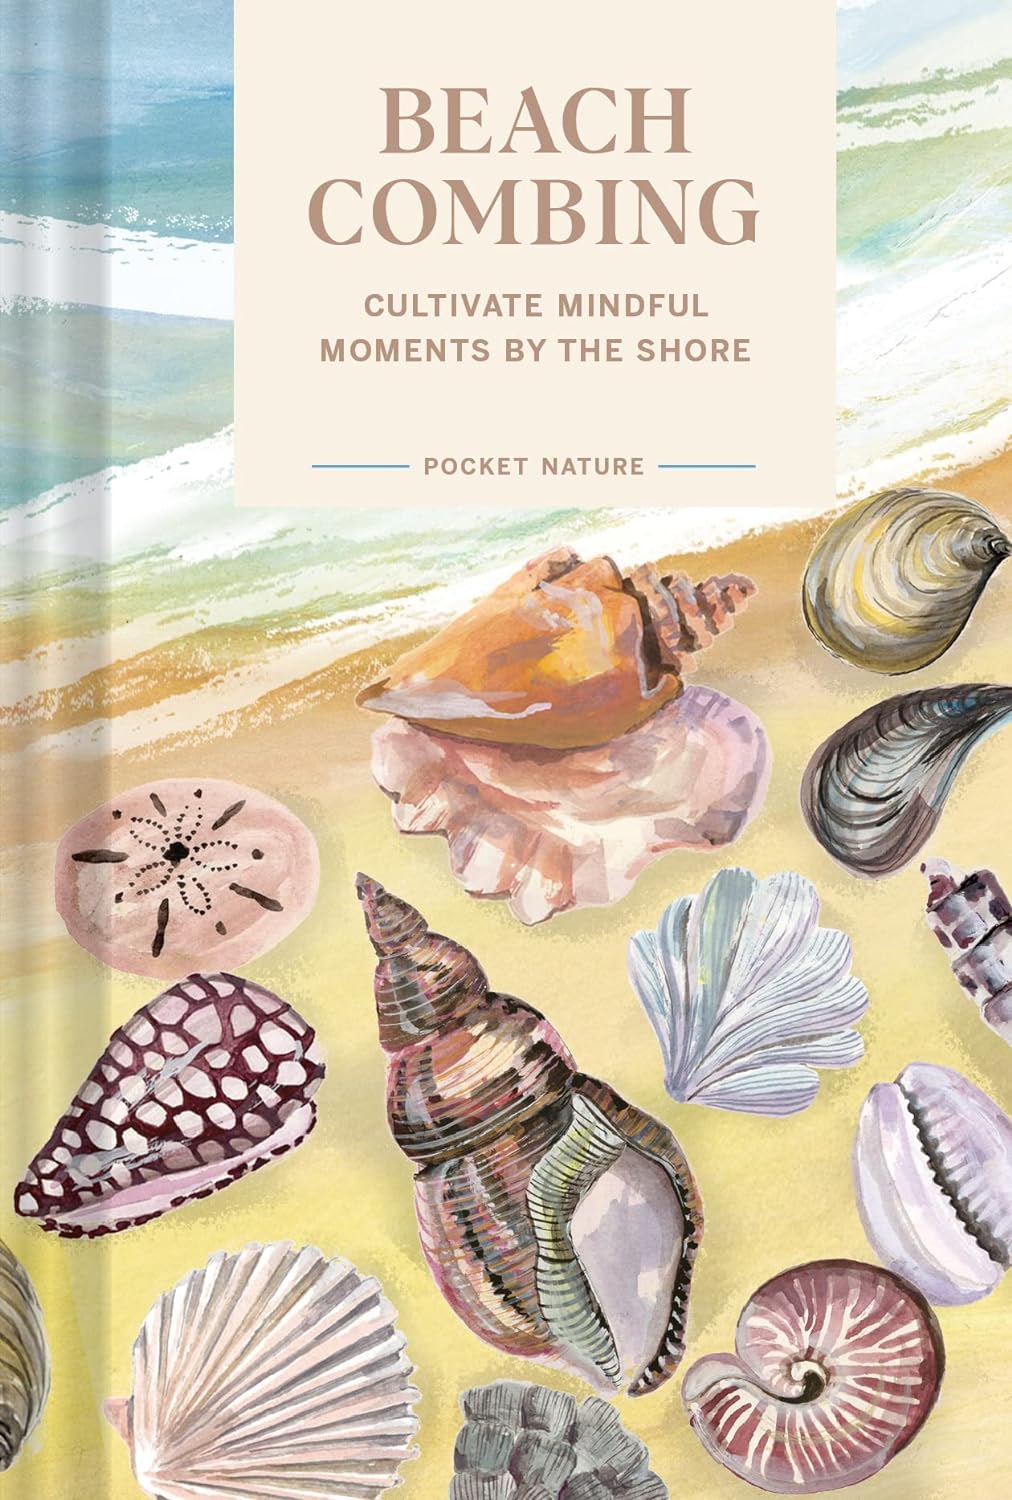 Beachcombing: Cultivate Mindful Moments by the Shore